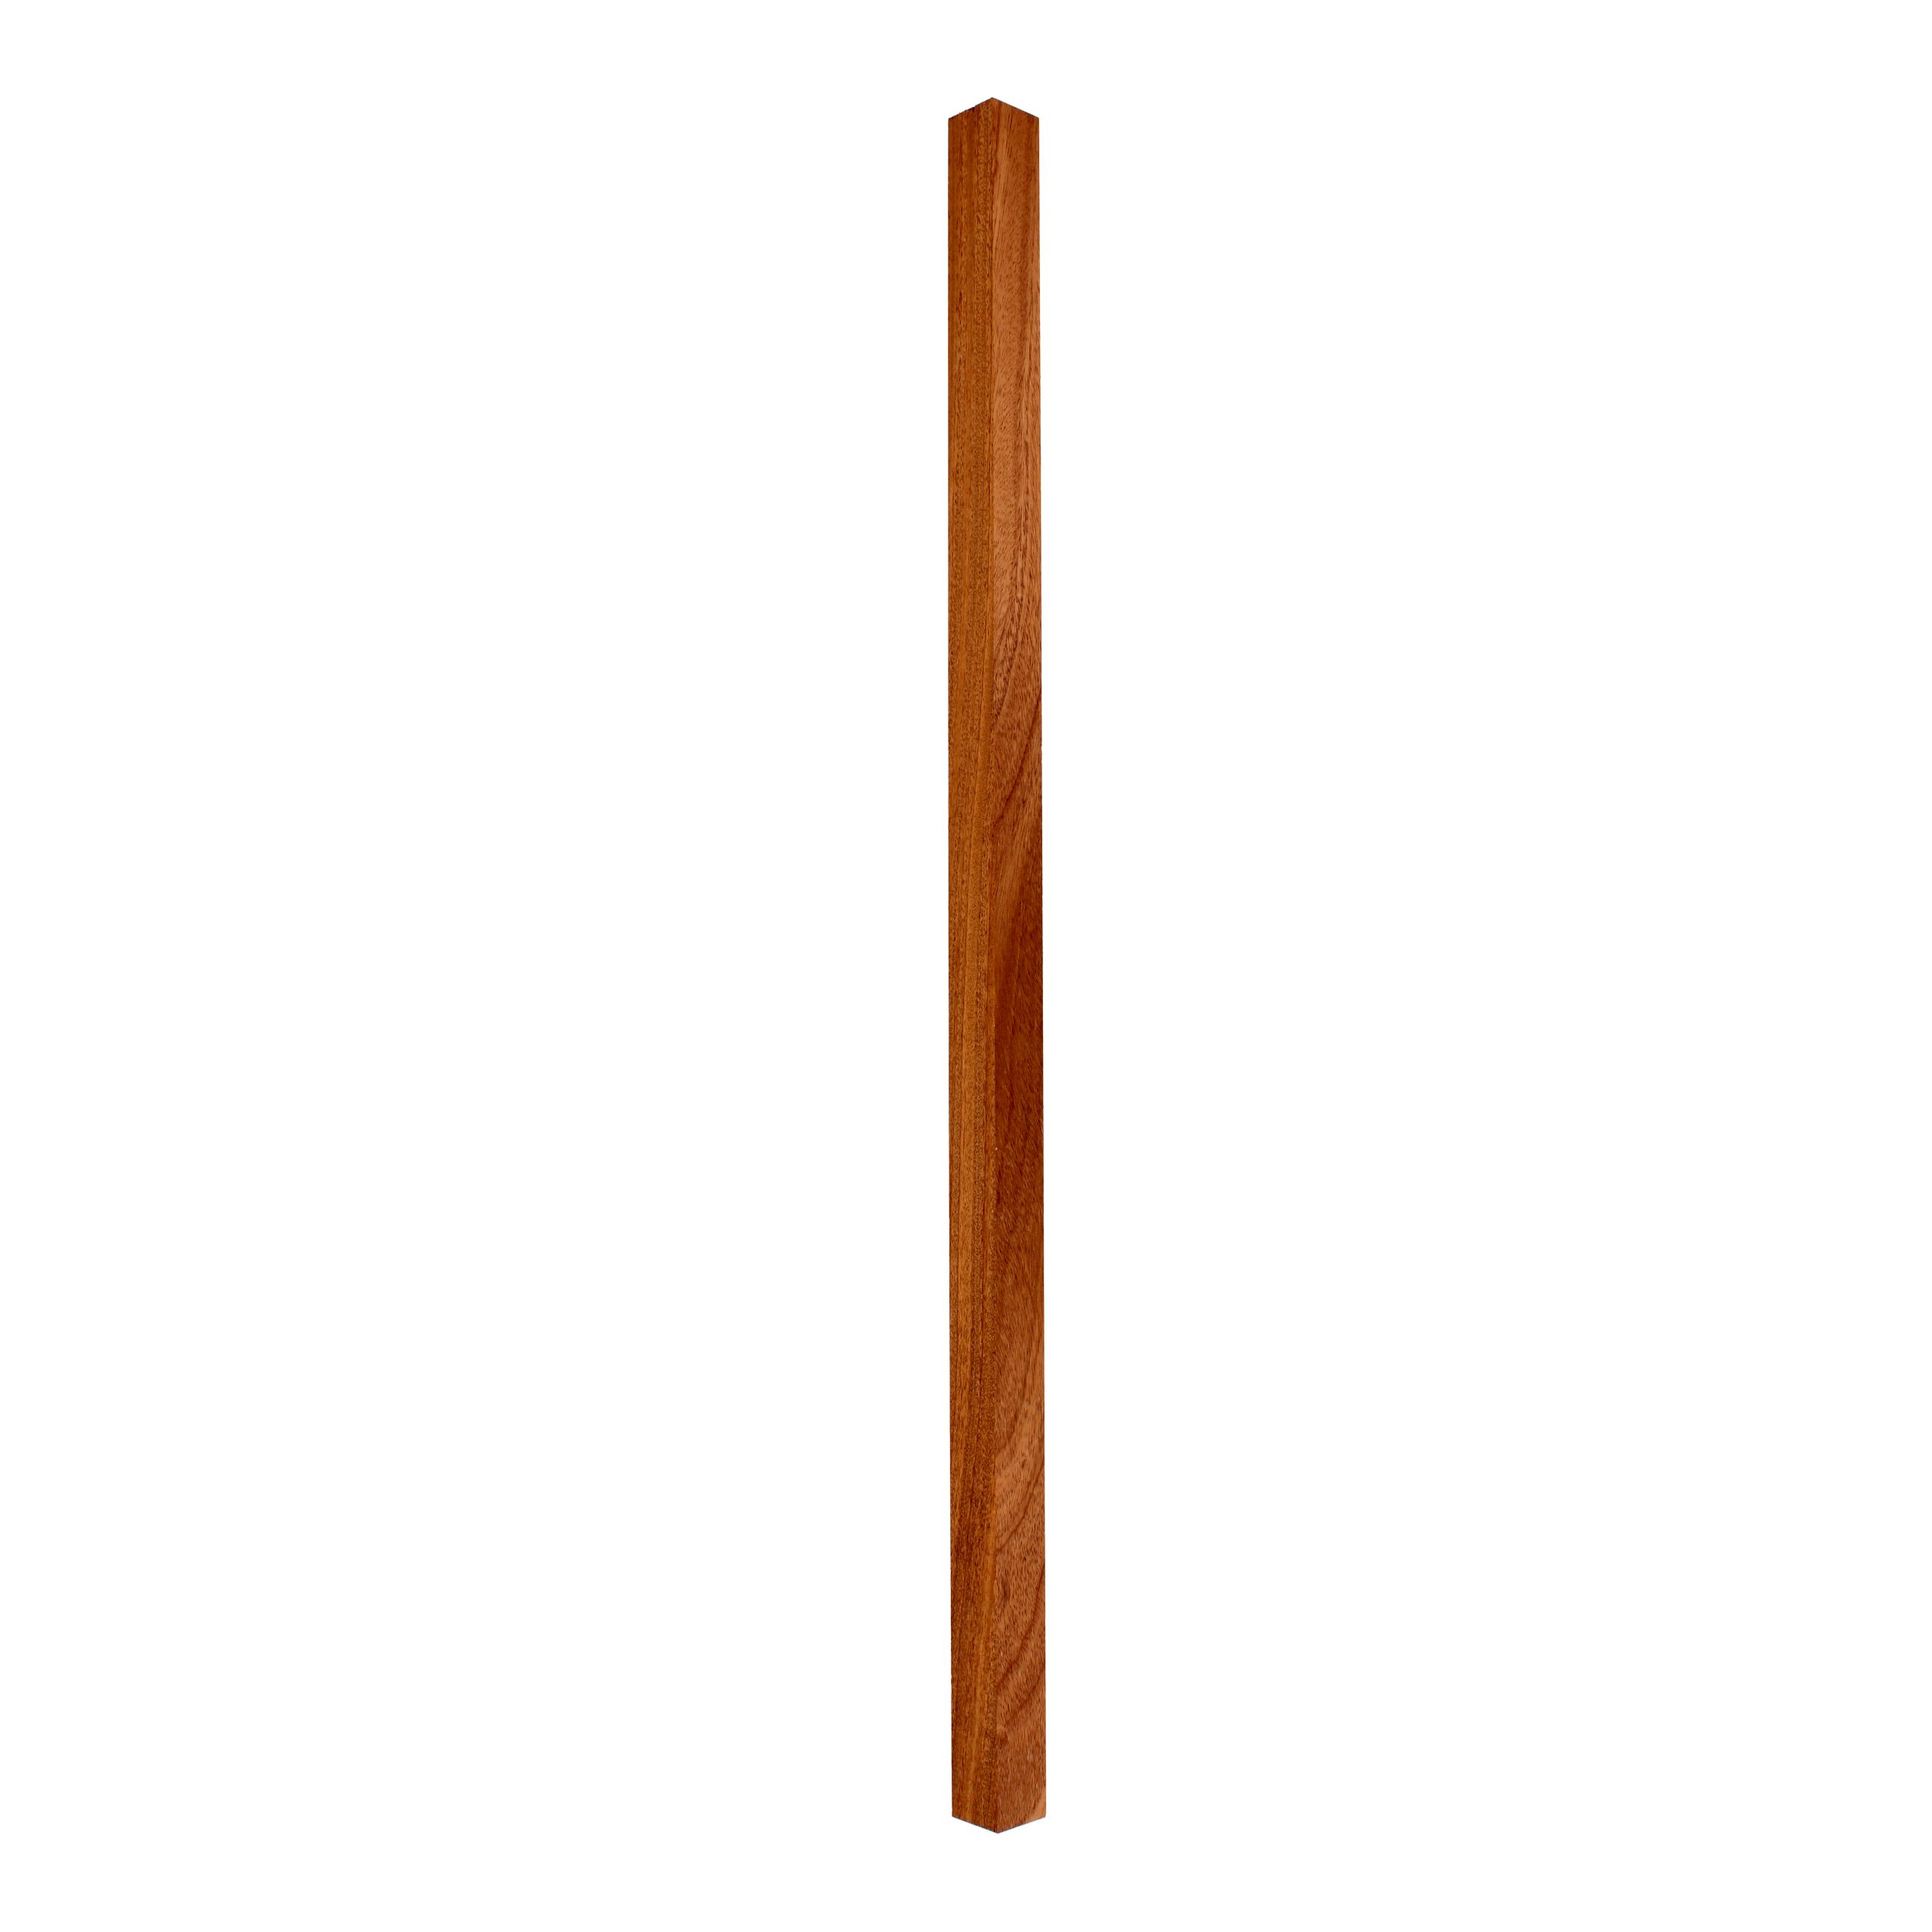 Mahogany-Square-35mm x 900 - Wooden staircase spindle.